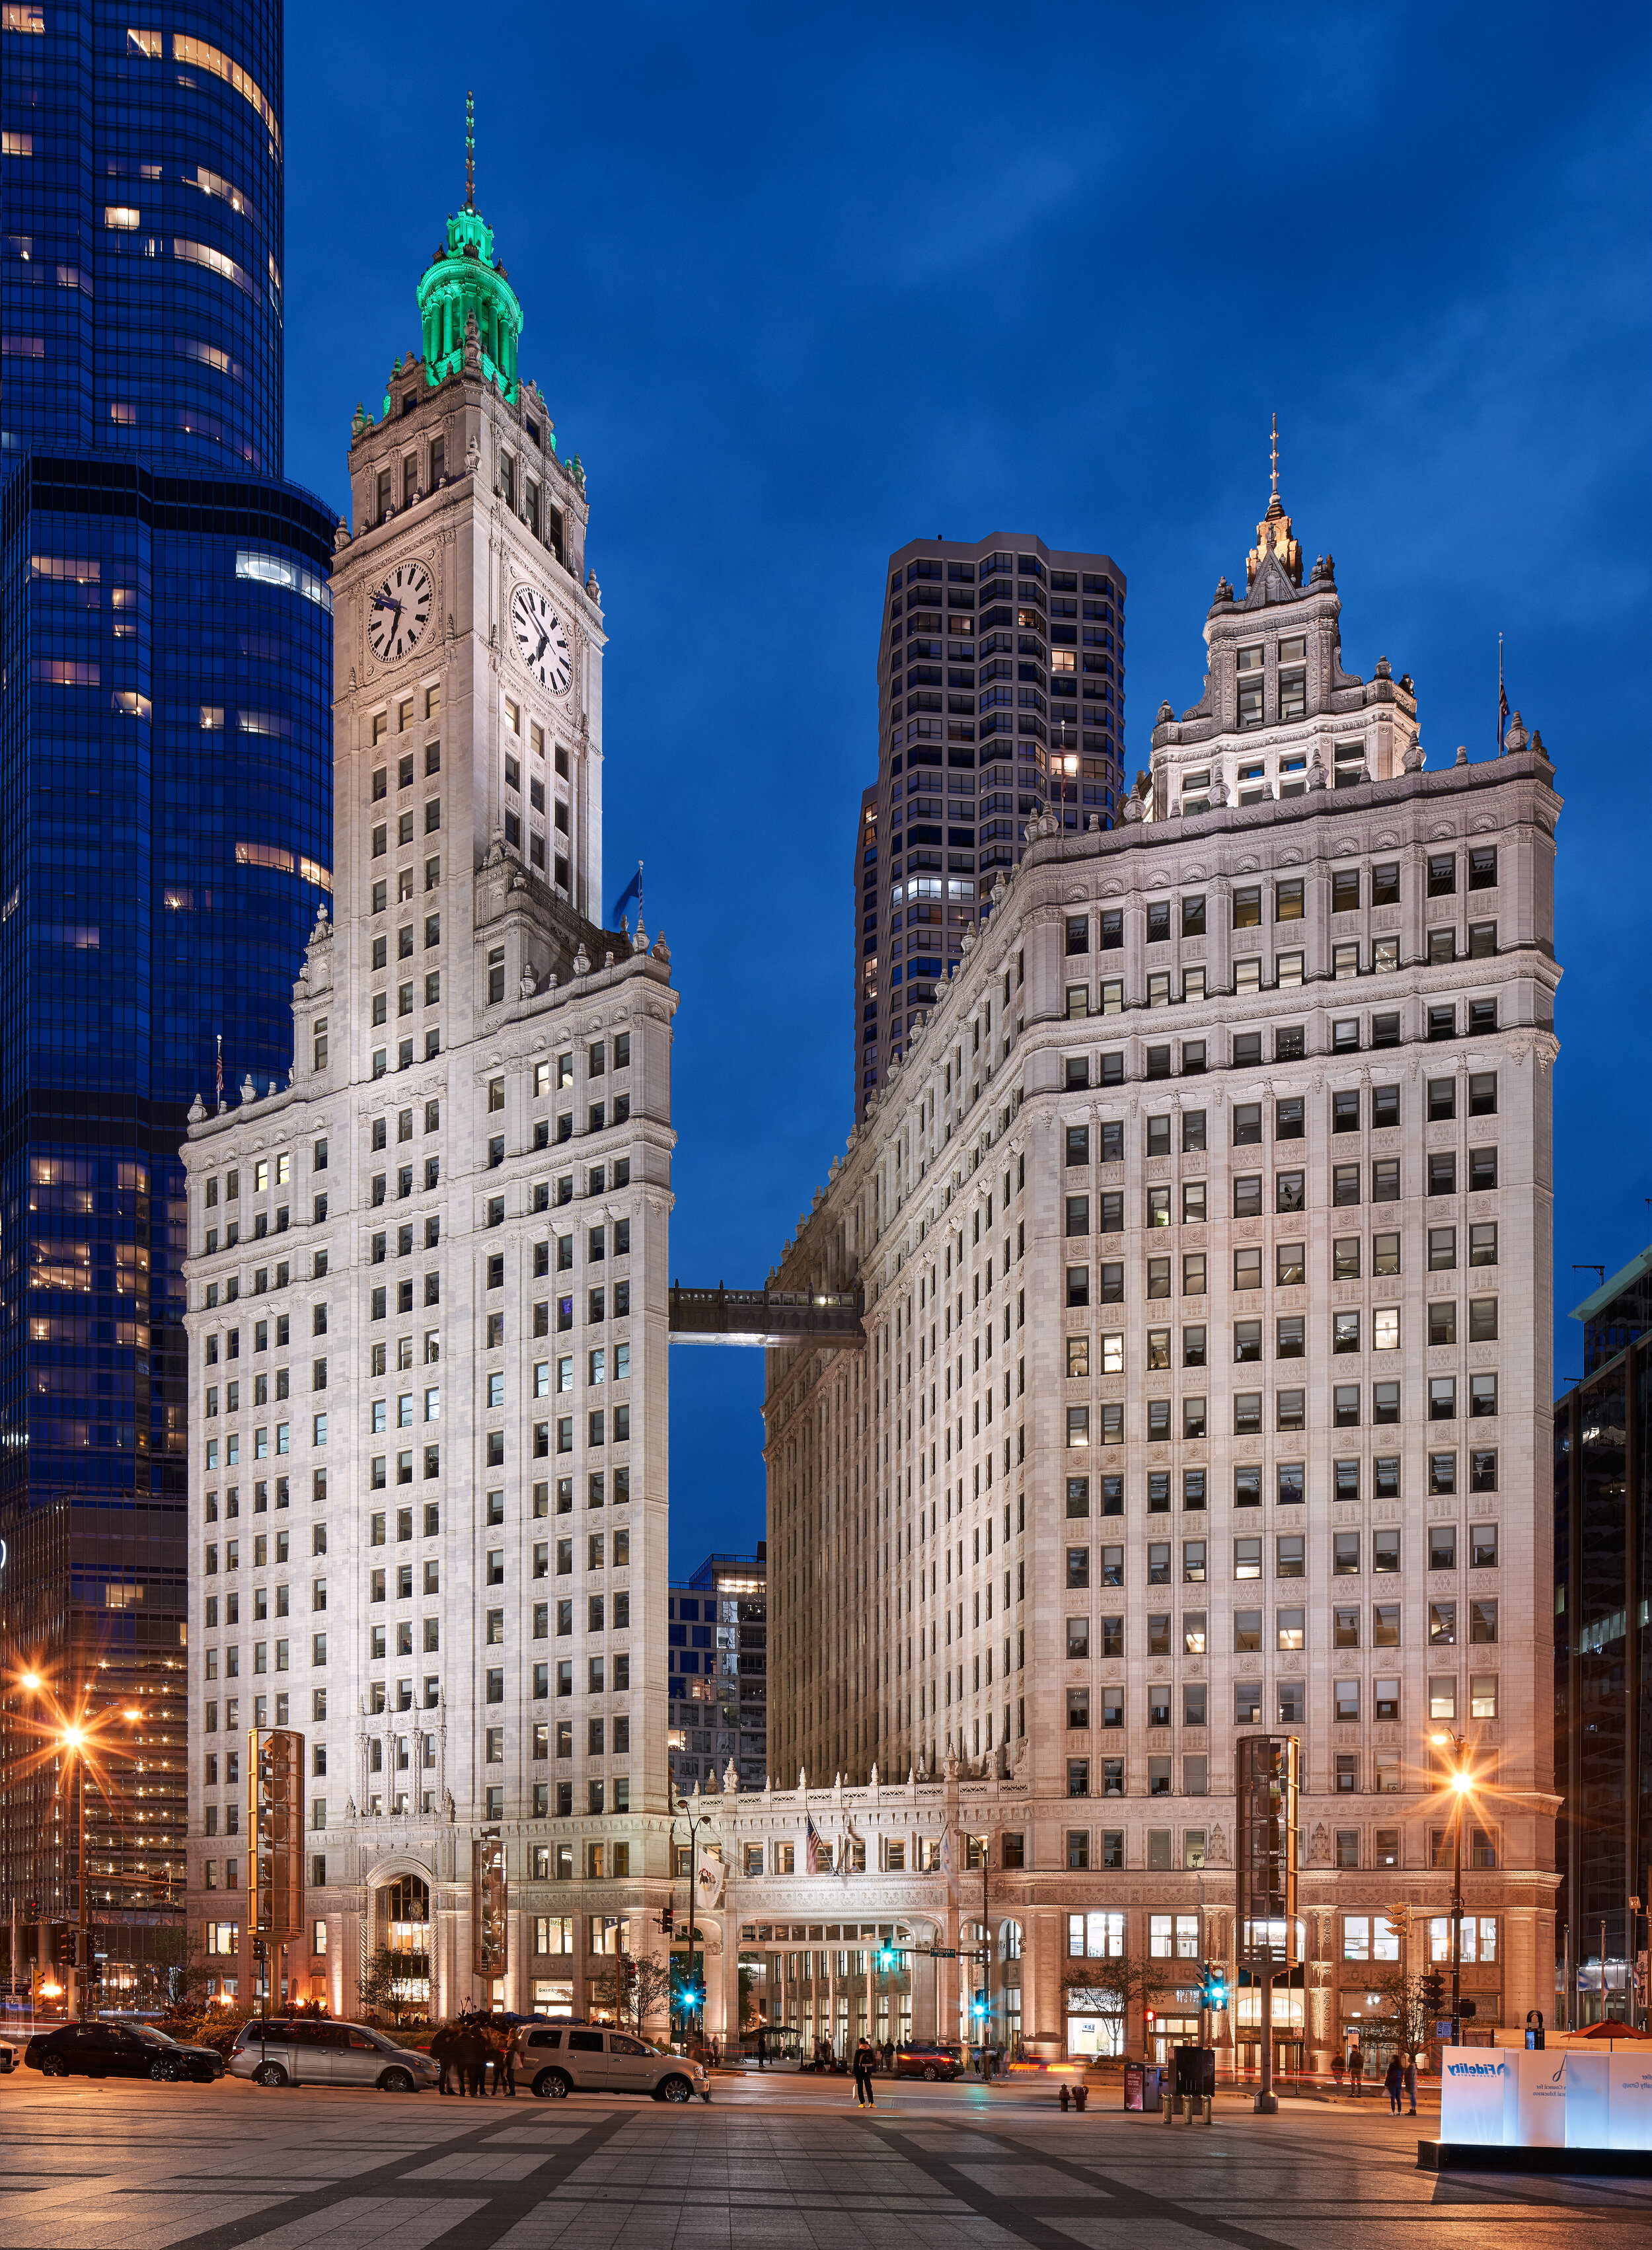 The Wrigley Building: Chicago, Illinois